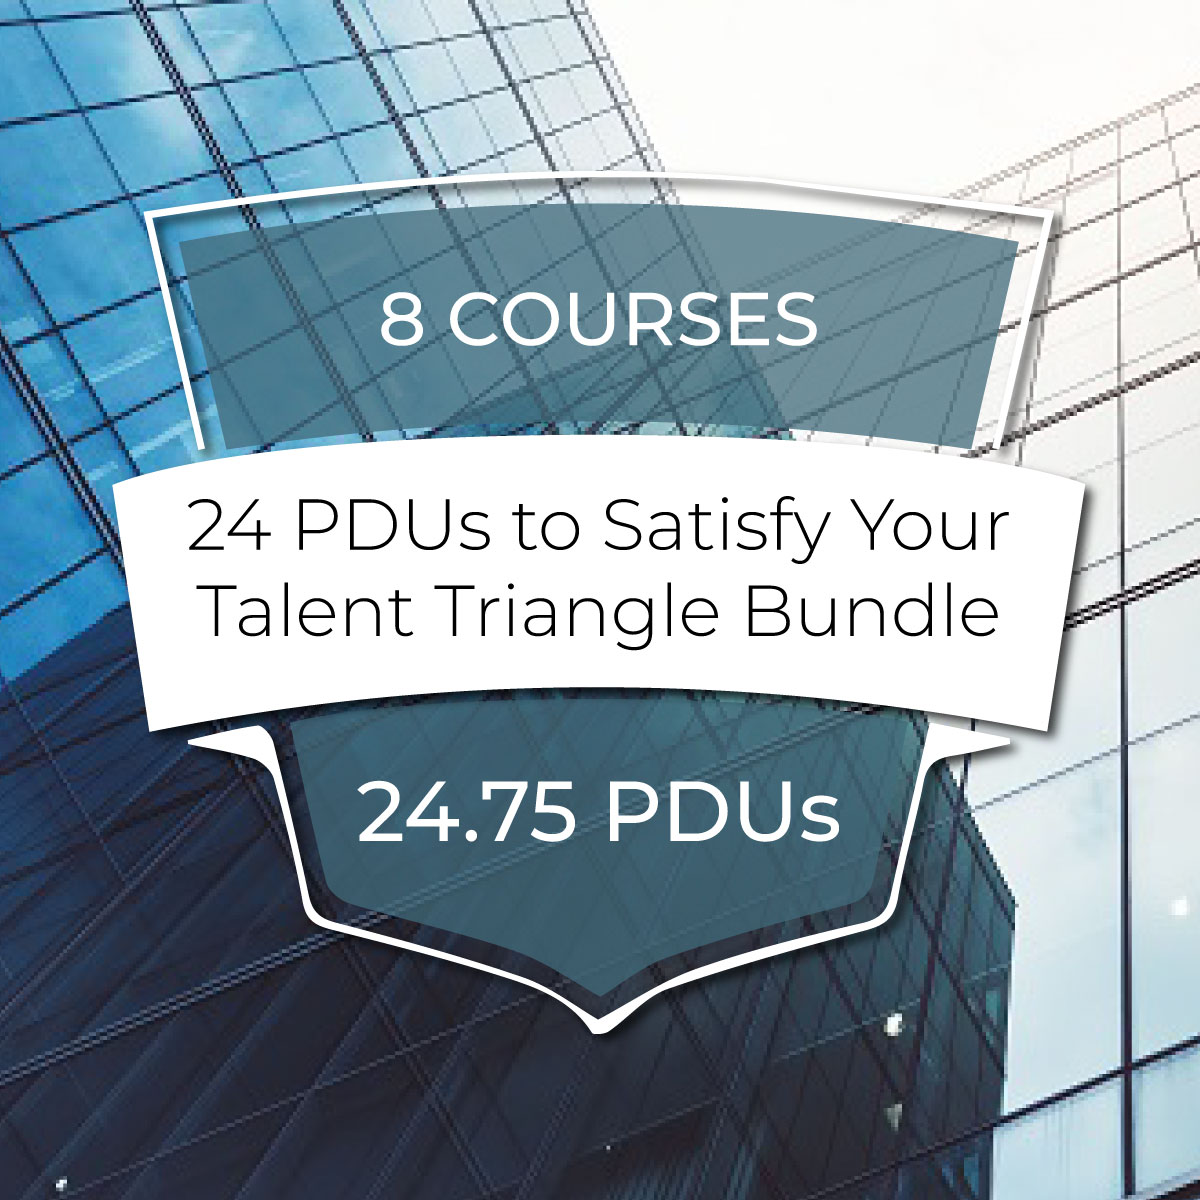 24 PDUs to Satisfy Your Talent Triangle Bundle